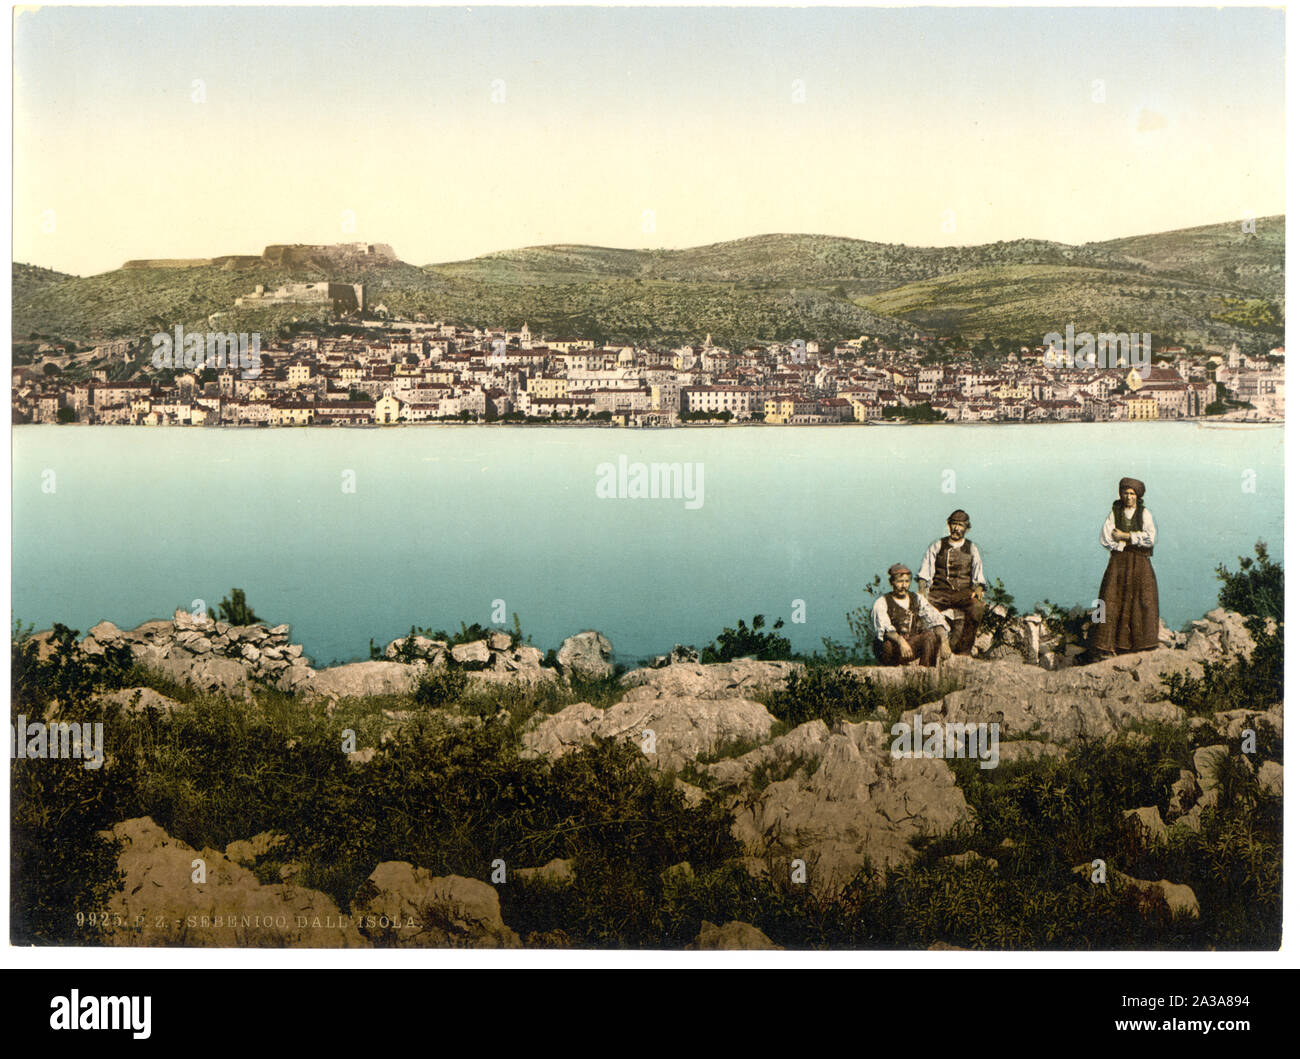 Sebenico, from the island, Dalmatia, Austro-Hungary; Forms part of: Views of the Austro-Hungarian Empire in the Photochrom print collection.; Title from the Detroit Publishing Co., Catalogue J-foreign section, Detroit, Mich. : Detroit Publishing Company, 1905.; Print no. 9925.; Stock Photo